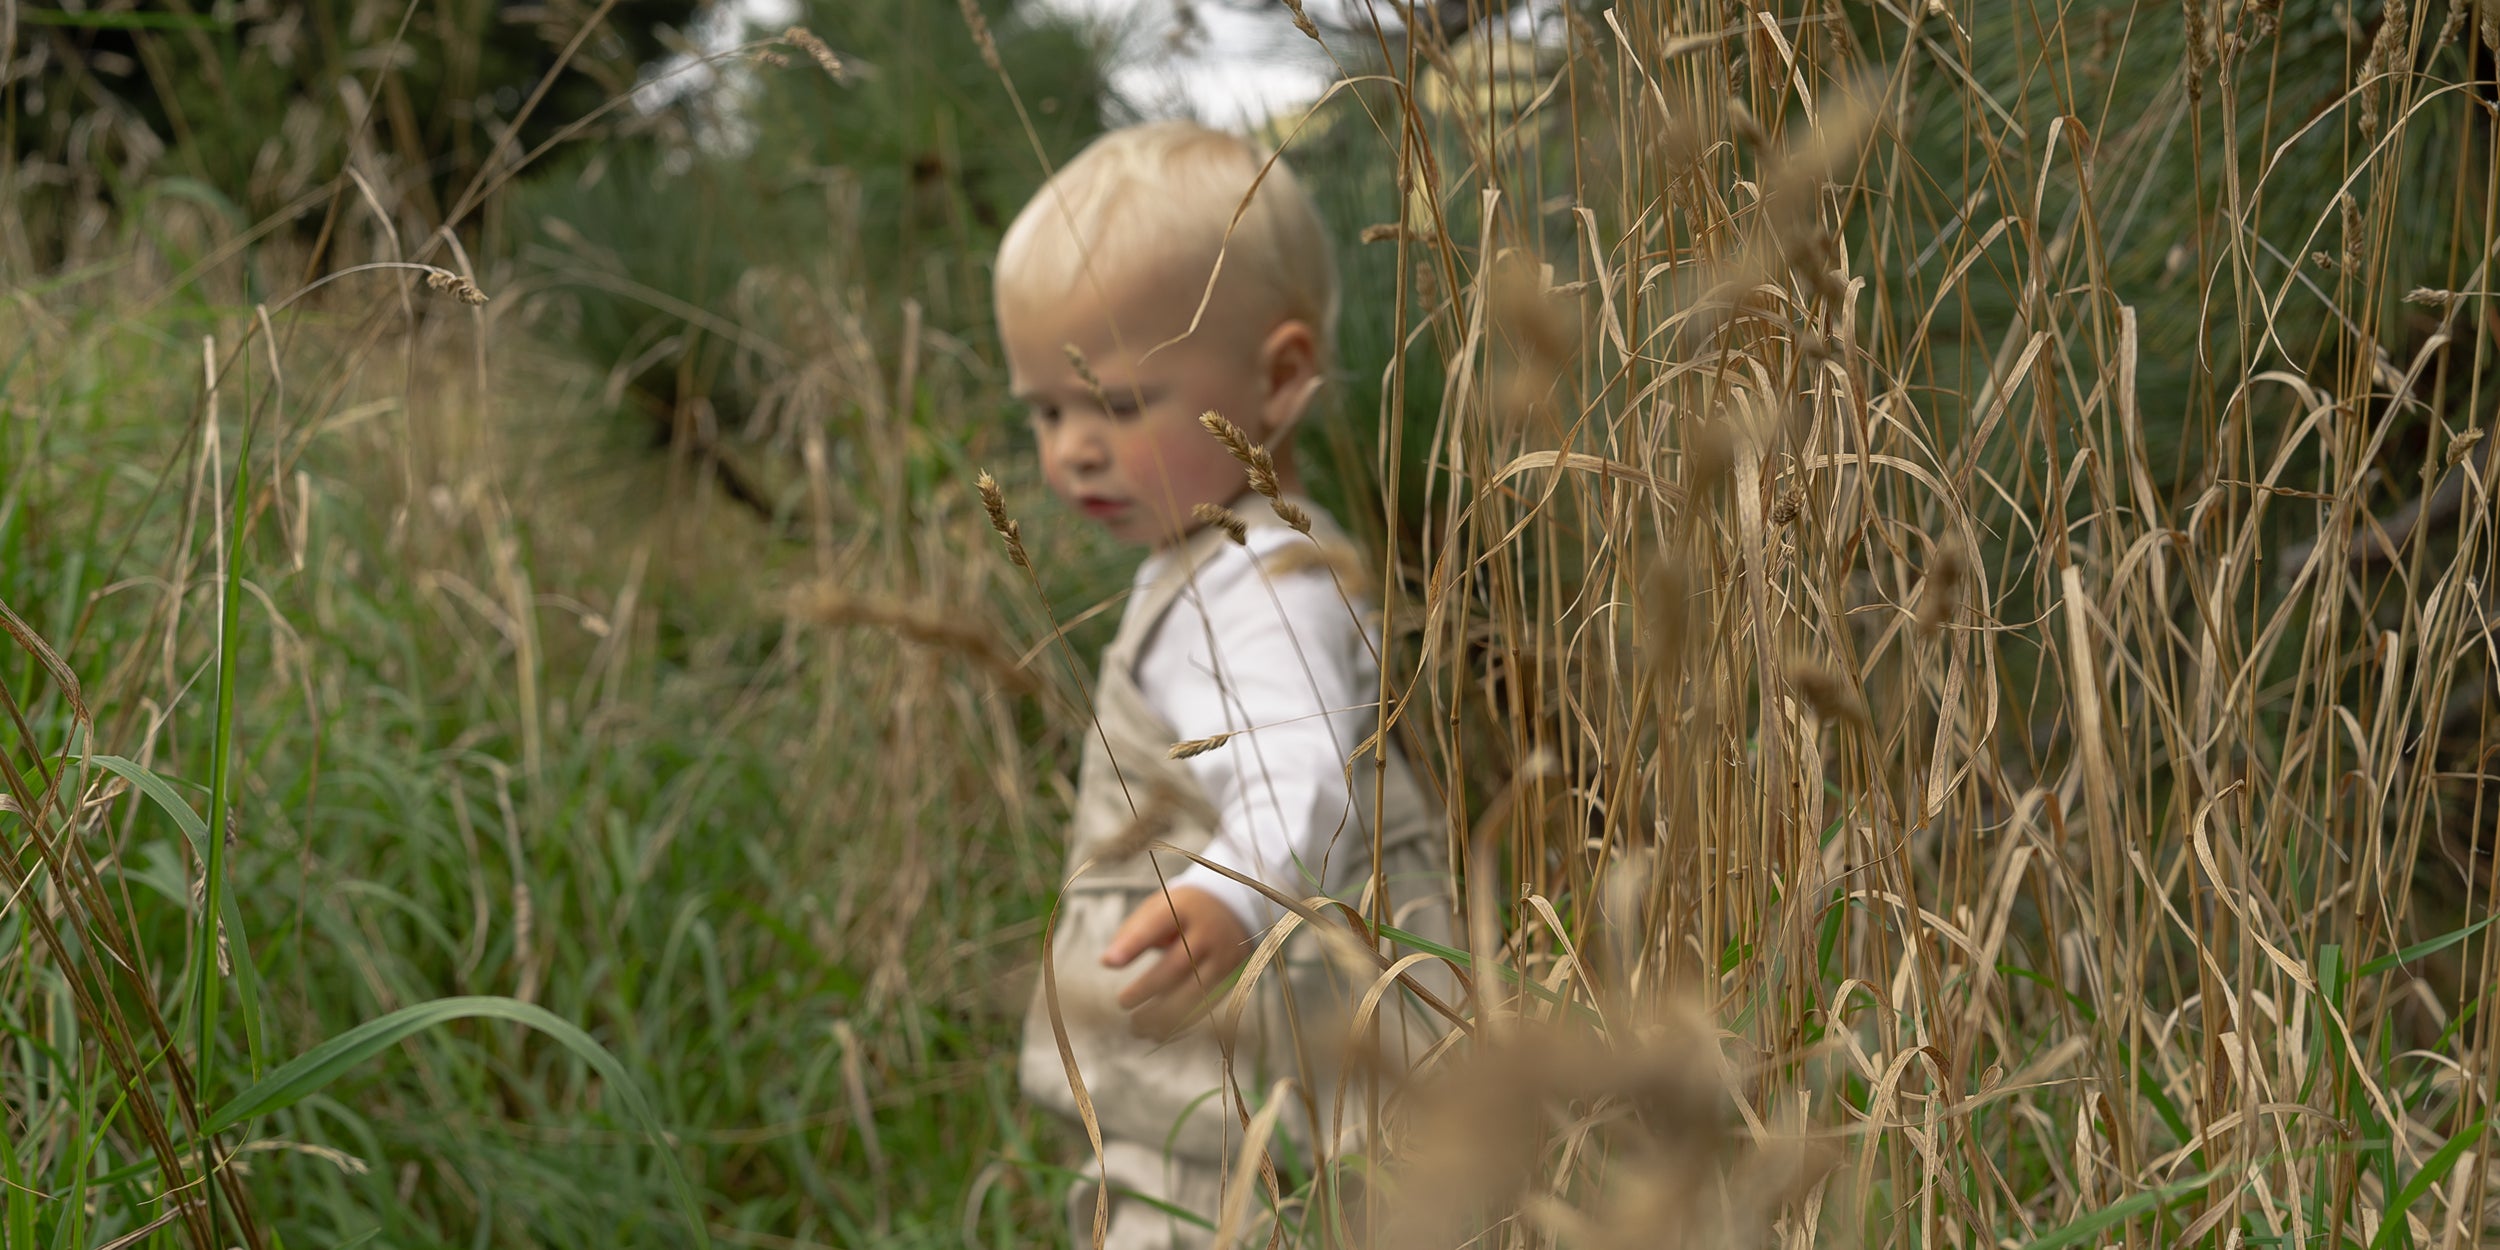 Organic clothing for babies, toddles, children made in NZ by Twee and Co